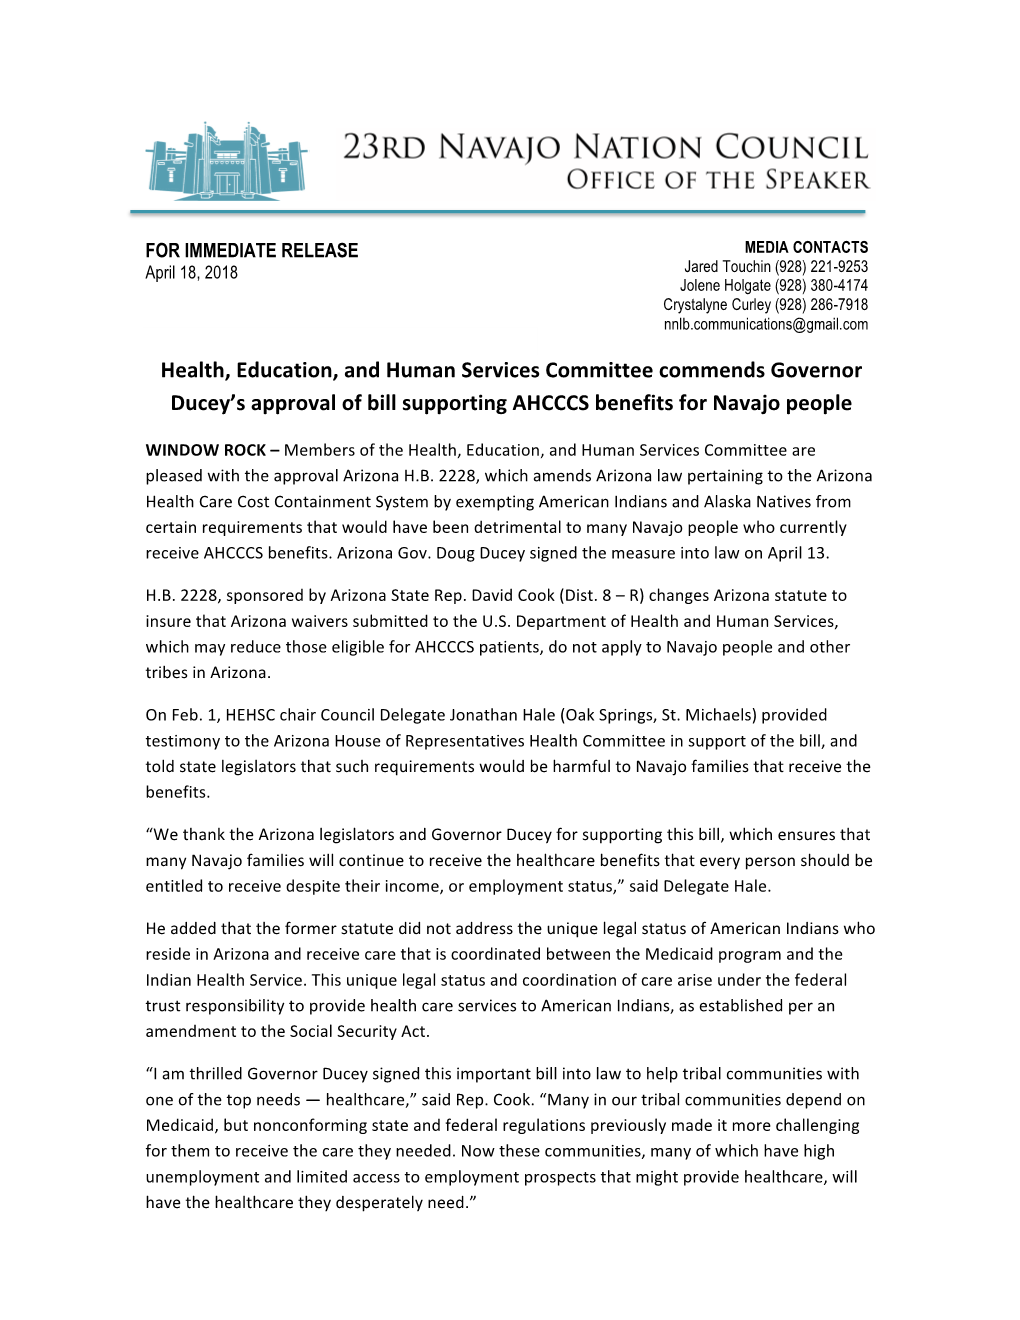 Health, Education, and Human Services Committee Commends Governor Ducey’S Approval of Bill Supporting AHCCCS Benefits for Navajo People